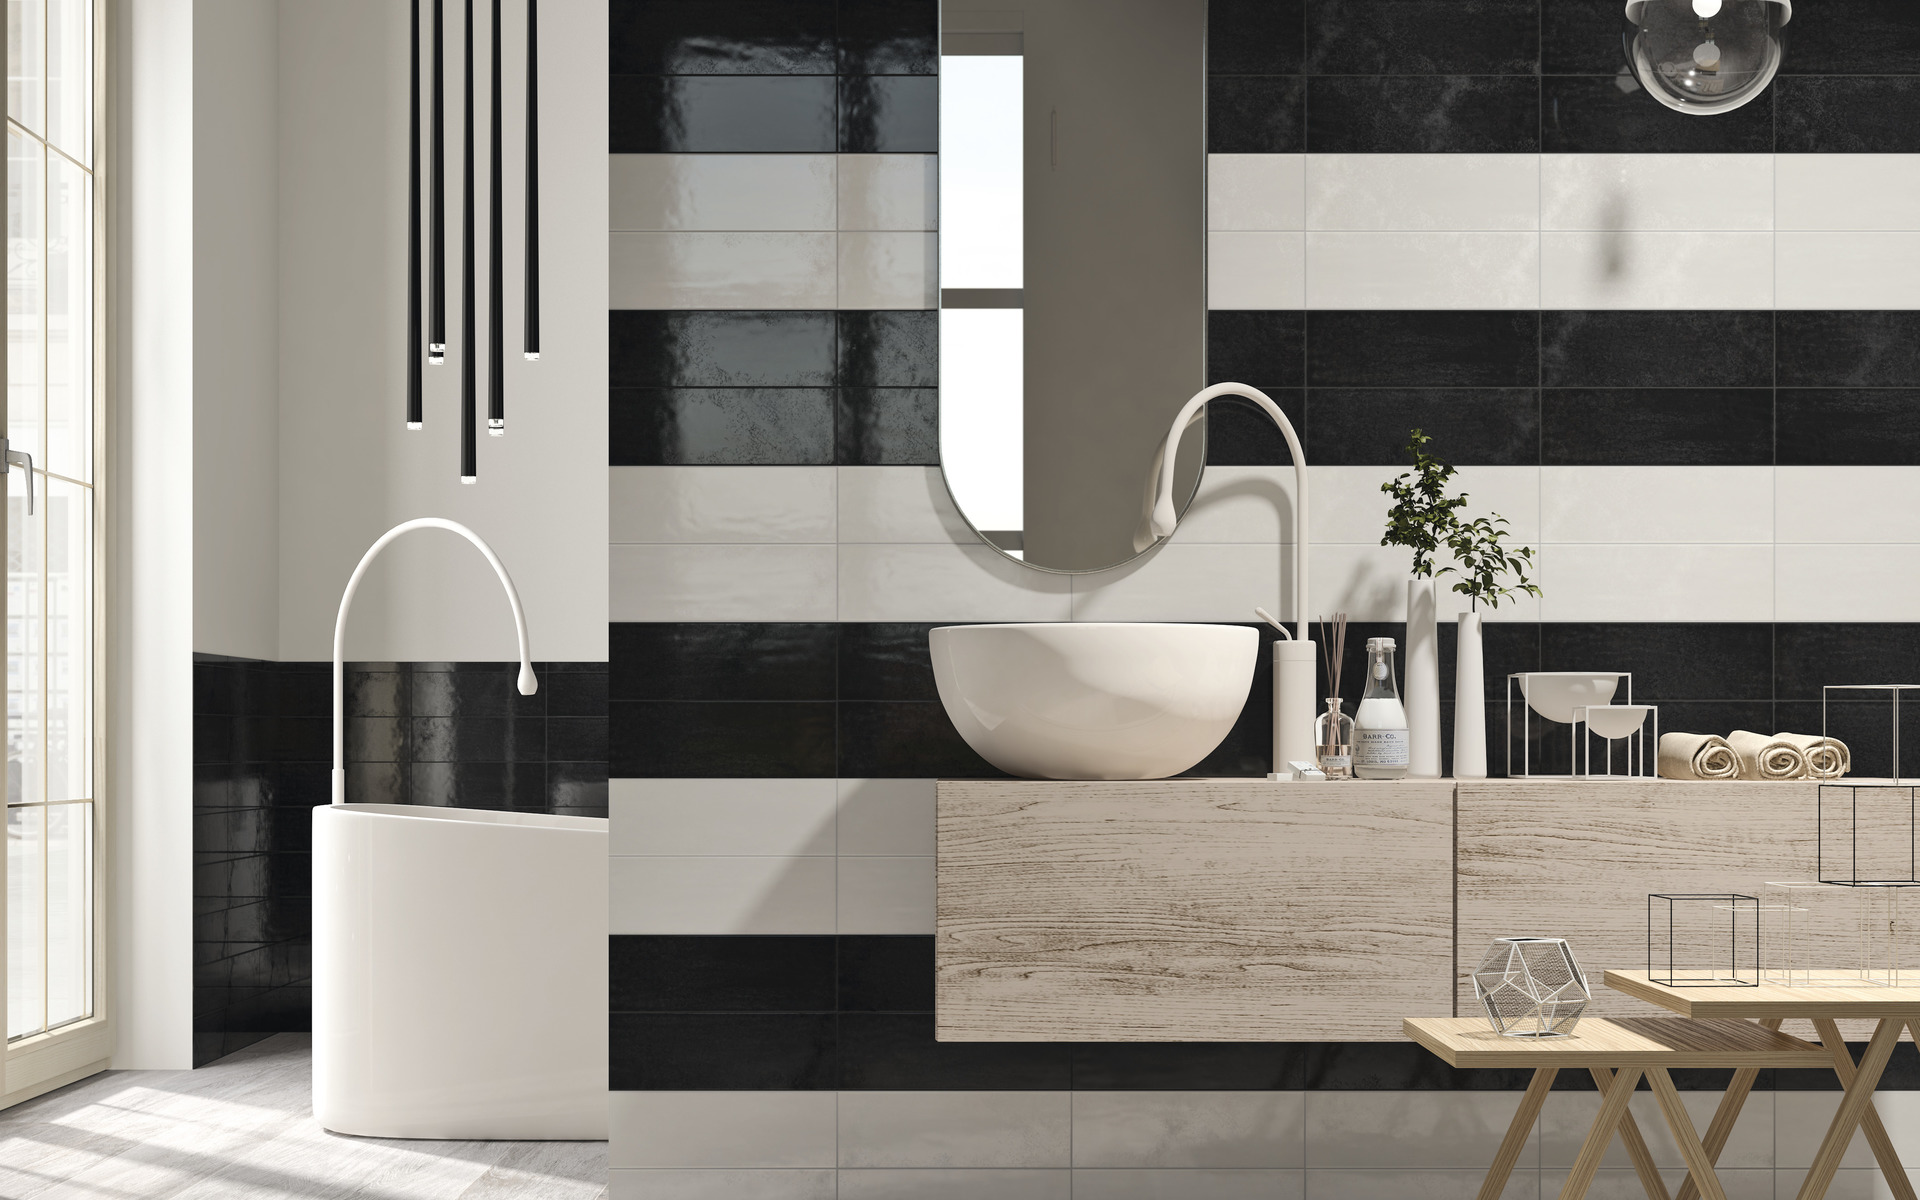 Intrigue Black and White tile installed in striped pattern. bathroom design